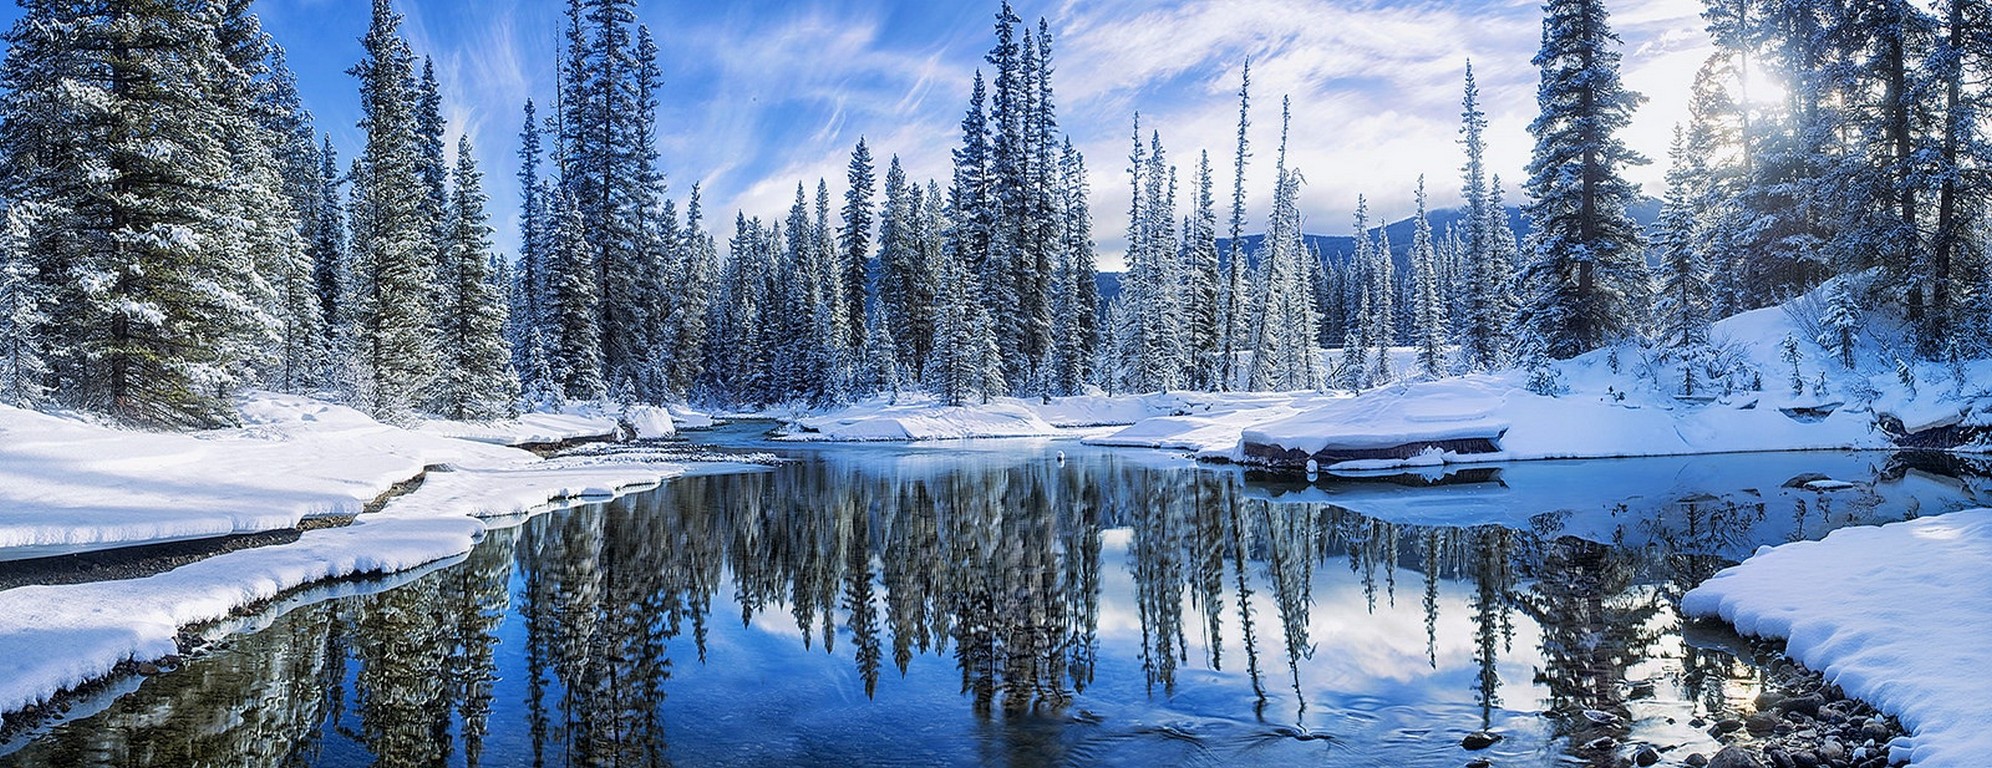 winter, Snow, Reflection, Forest, Water, River, White, Blue, Nature, Landscape Wallpaper